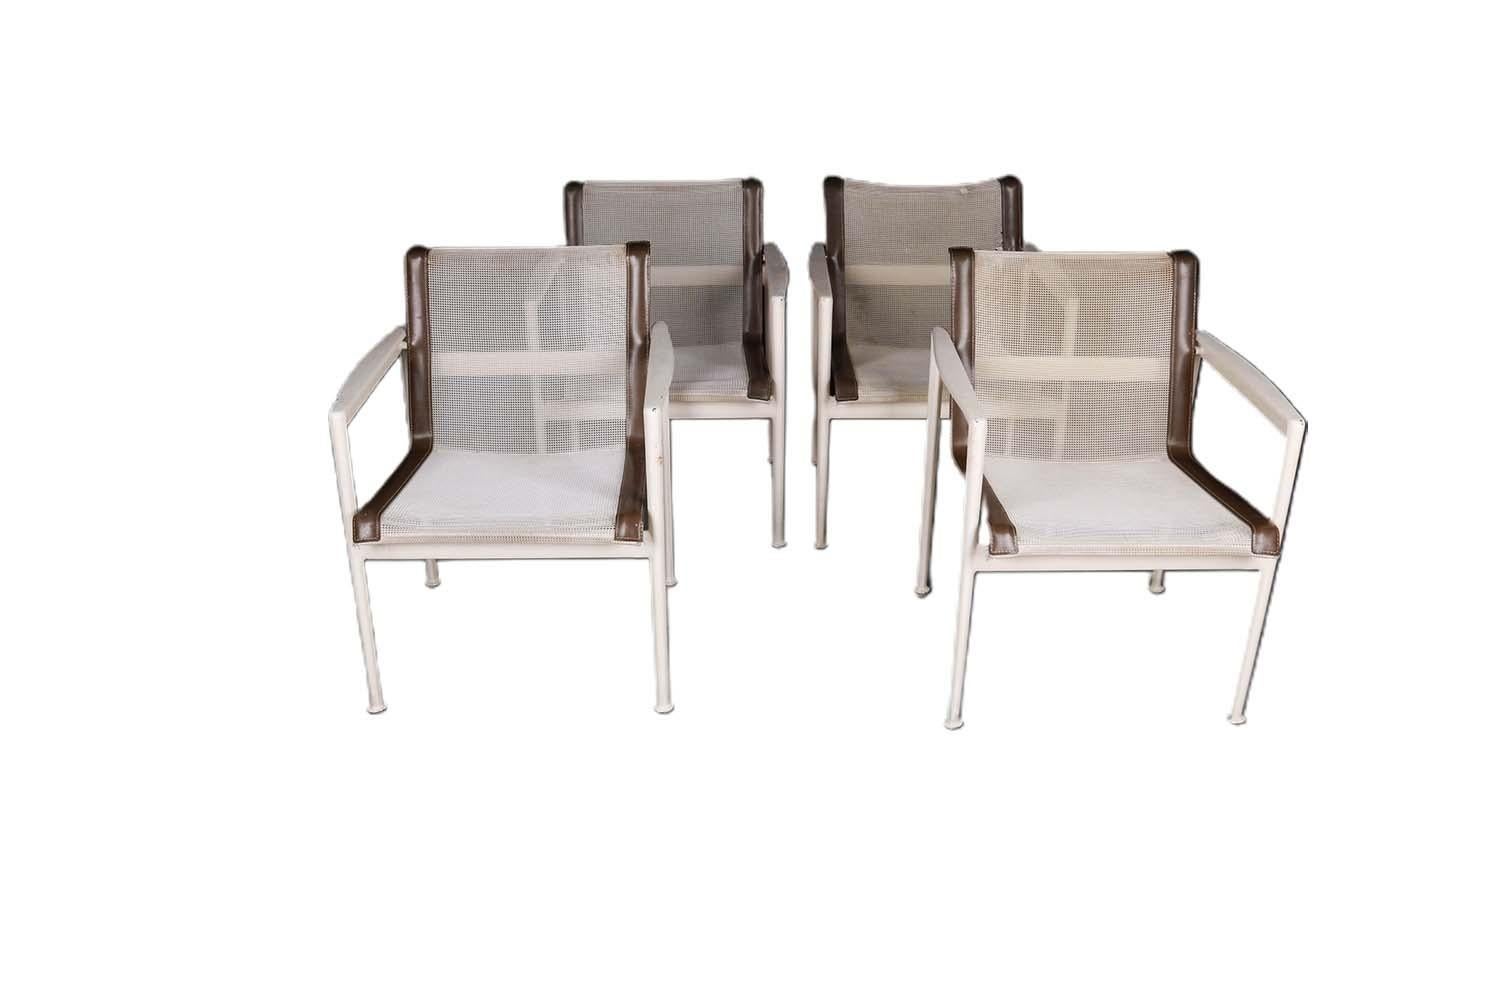 Set of four patio lounge armchairs by famous designer Richard Schultz for Florence Knoll, made in the United States, circa 1960's. Superbly crafted, each features aluminum white painted frames and signature woven mesh seats and backrest, in a white